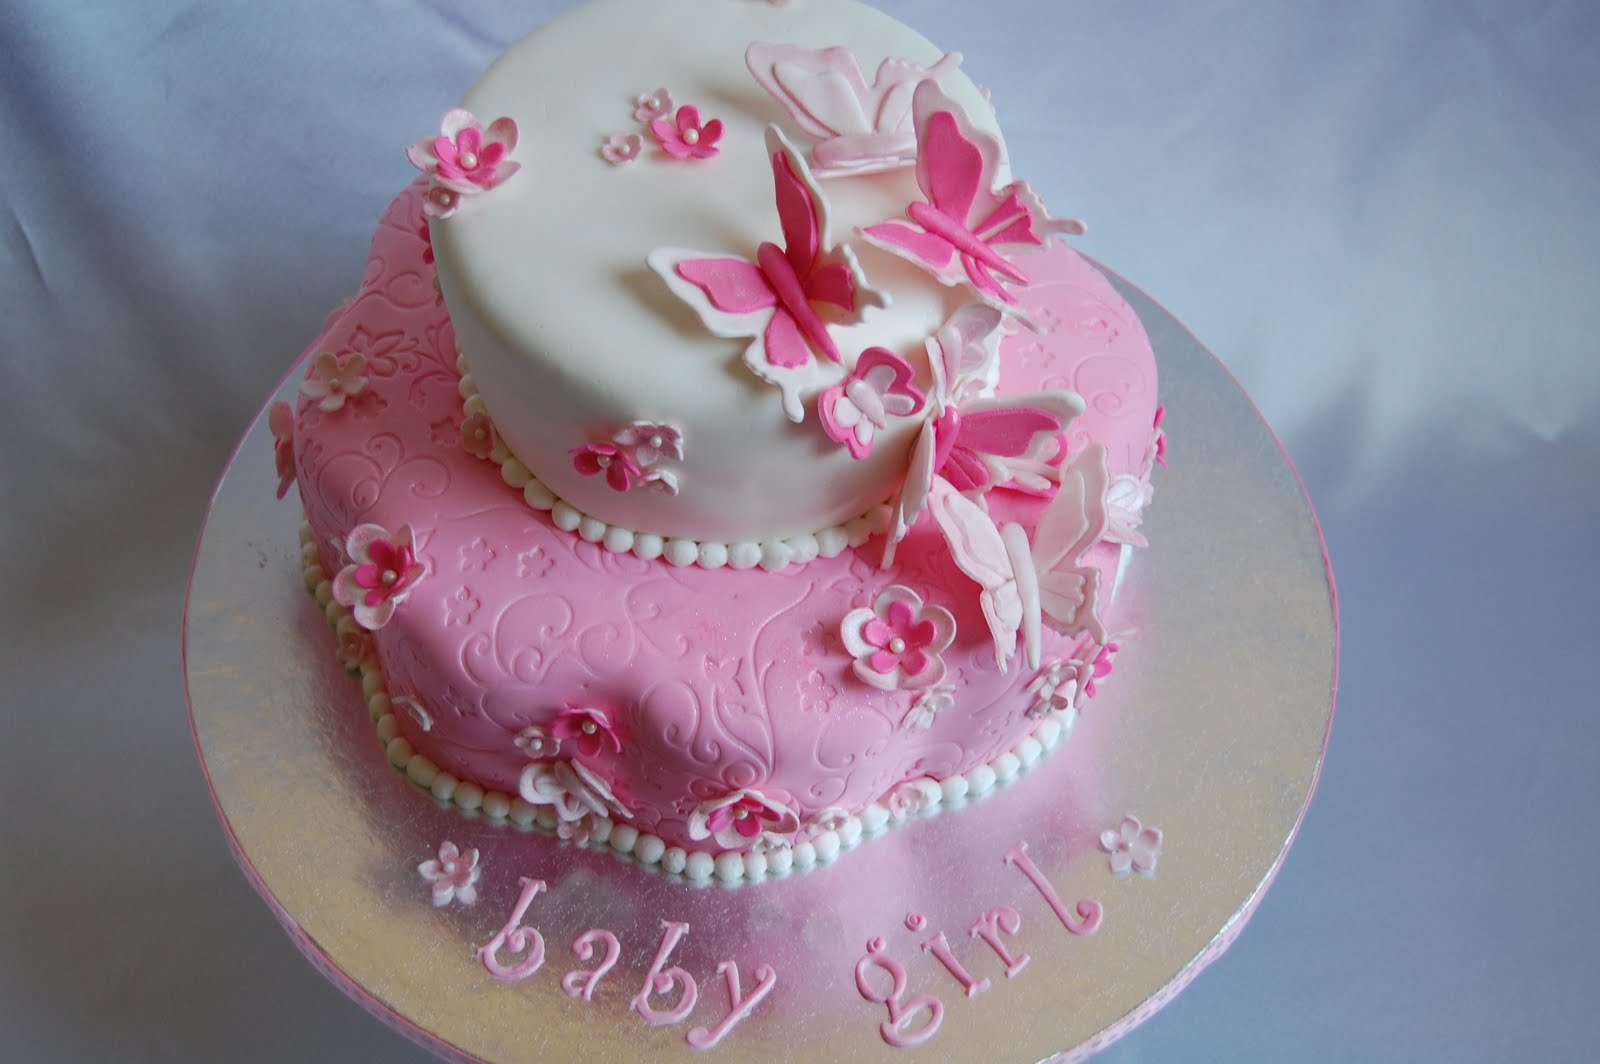 ... cake was an order for a special friend expecting a little girl